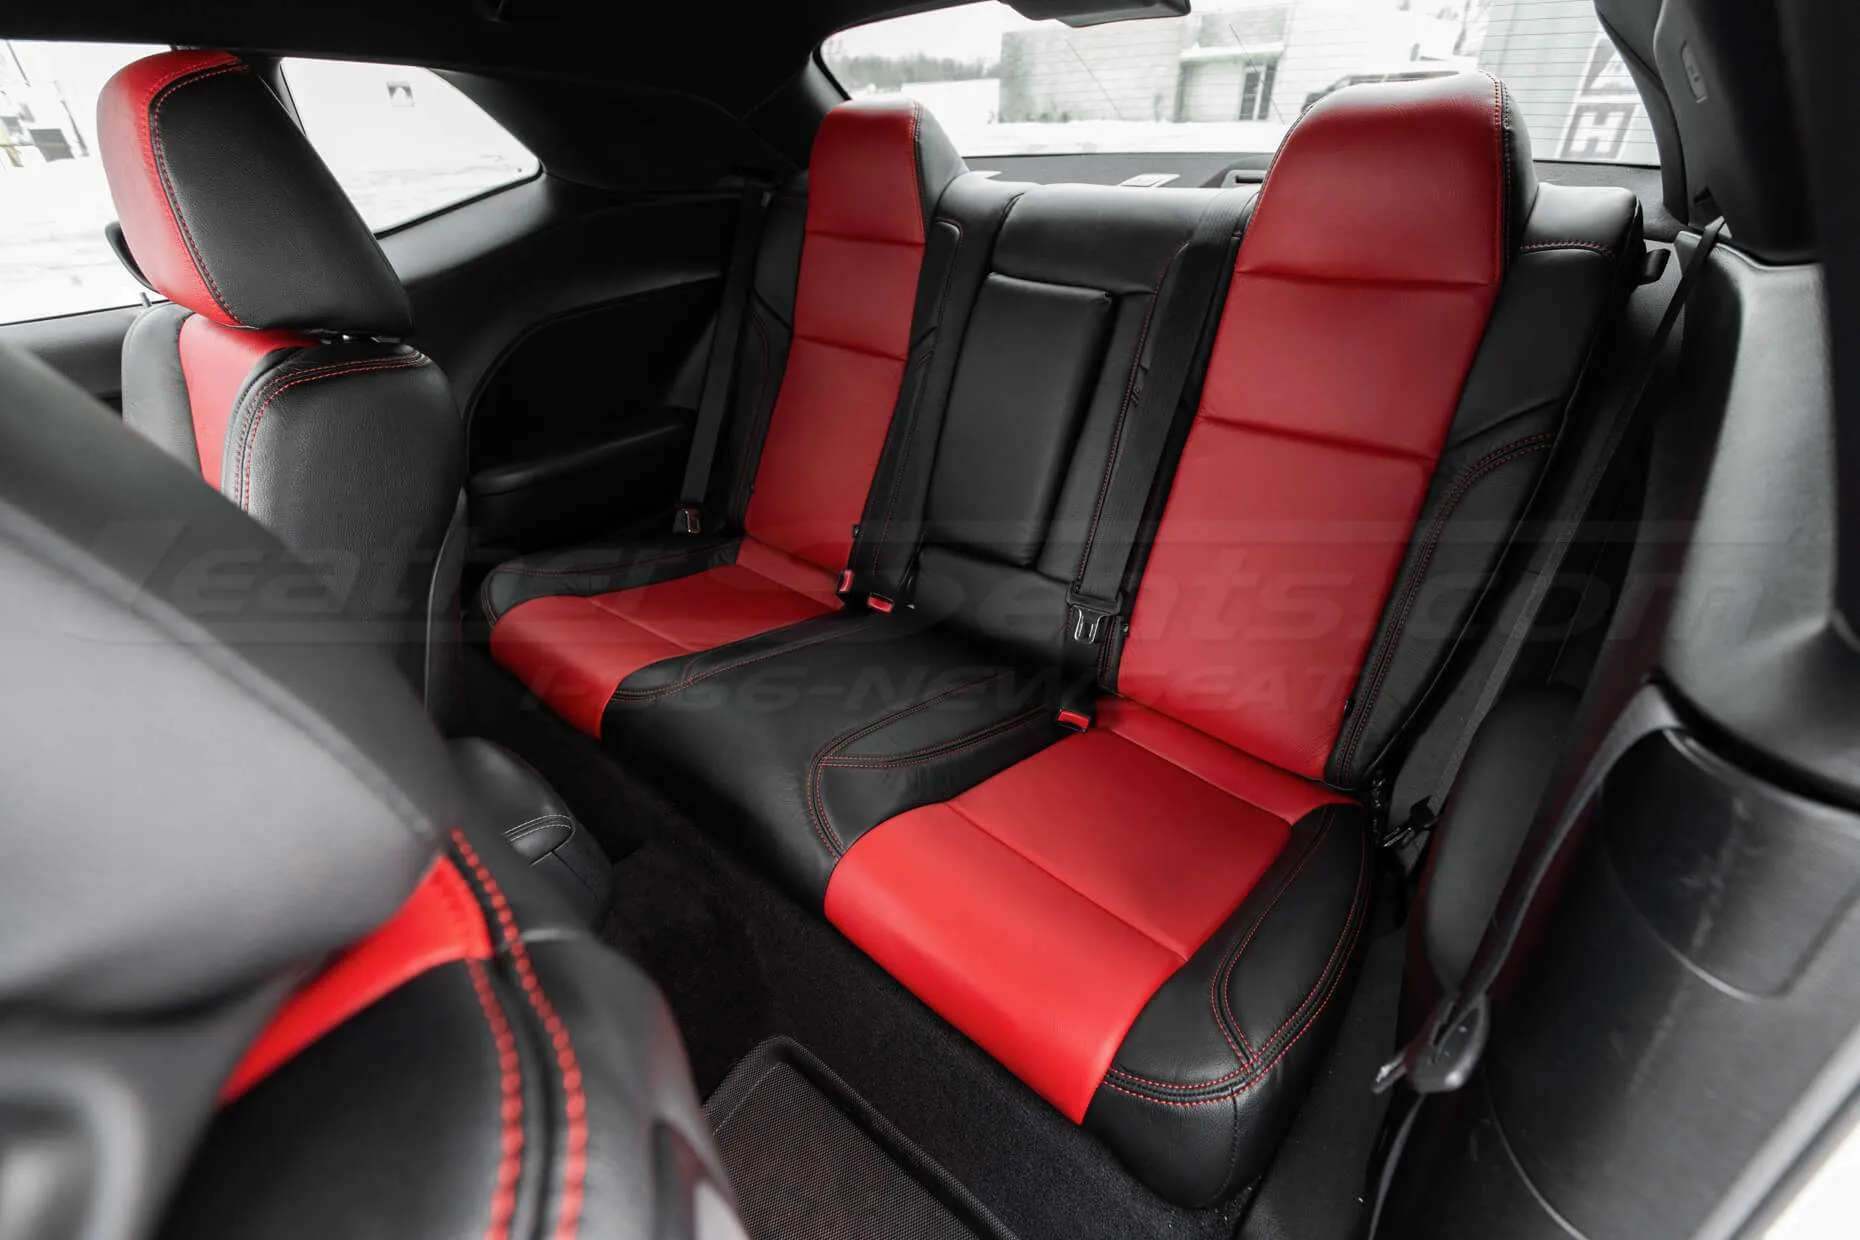 15-20 Dodge Challenger Upholstery Kit - Black & Bright Red - Installed - Rear seats